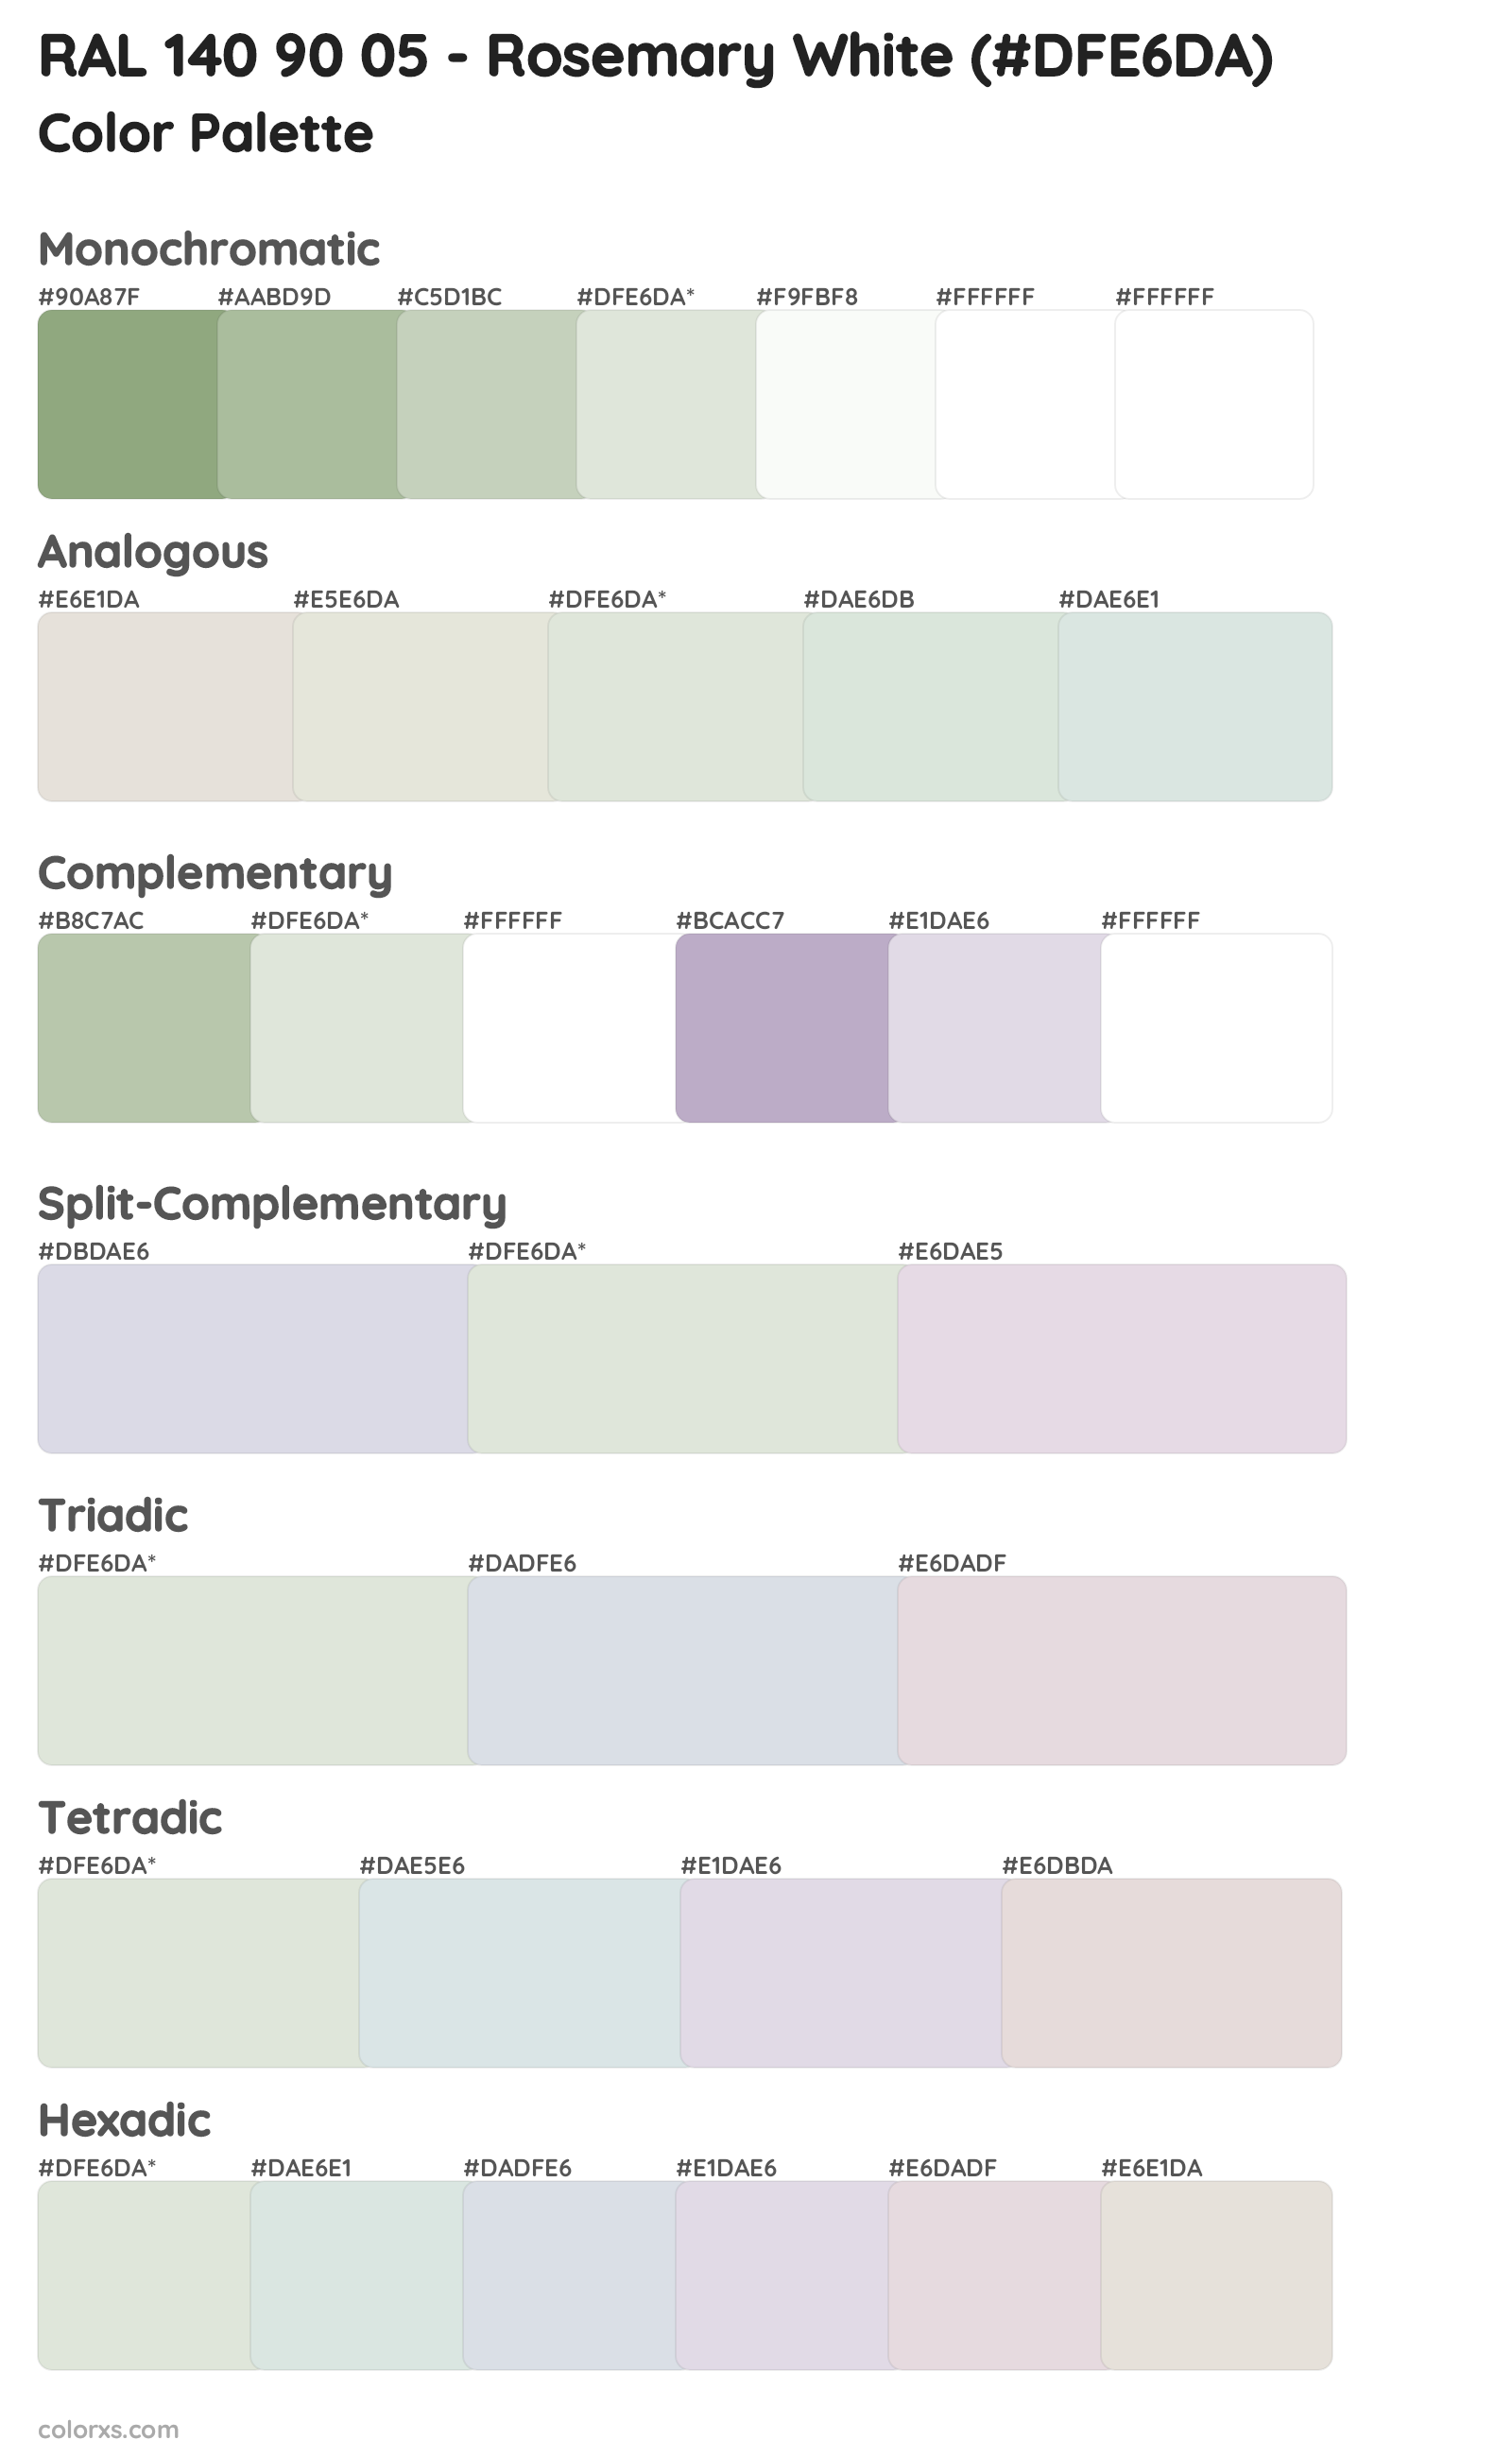 RAL 140 90 05 - Rosemary White Color Scheme Palettes